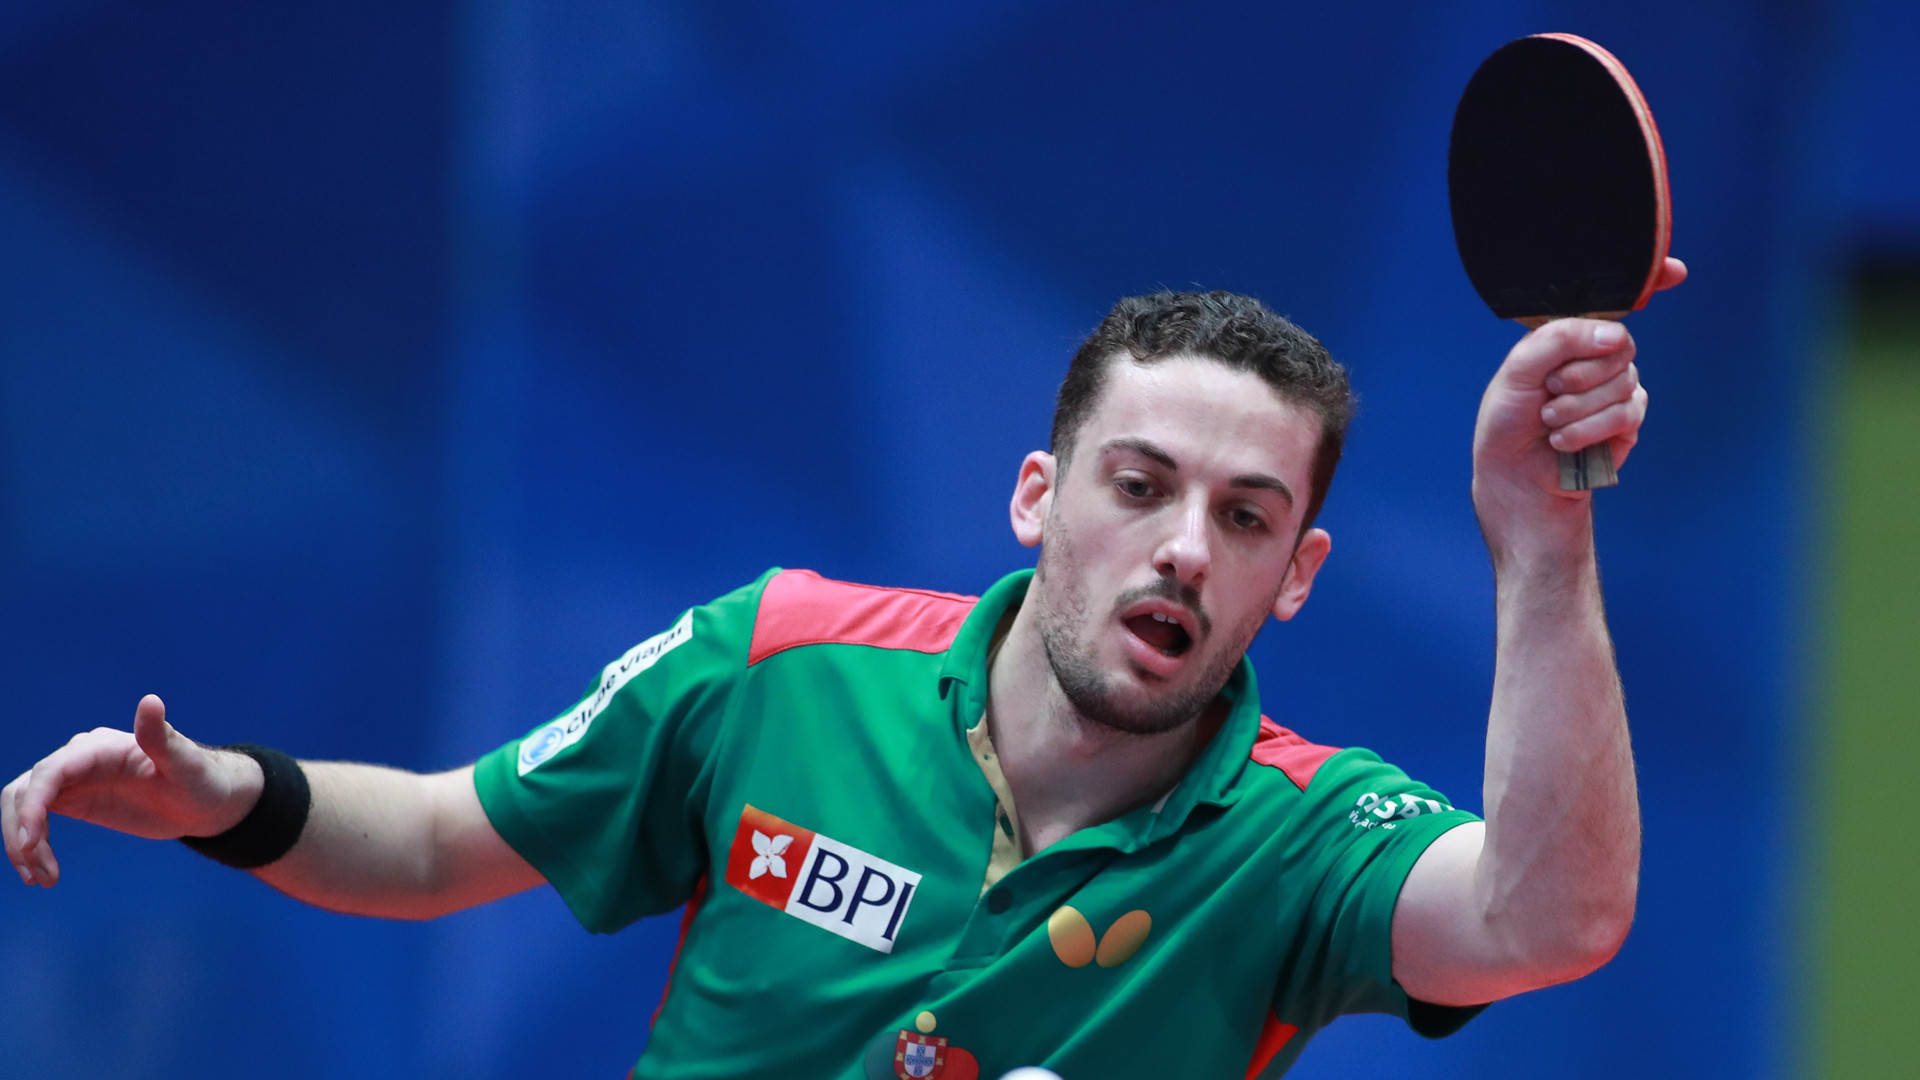 Portugal's Marcos Freitas was among the players that progressed through to the third preliminary round of the men's singles event as action begun today at the ITTF Bulgaria Open in Panagyurishte ©Rémy Gros/ITTF